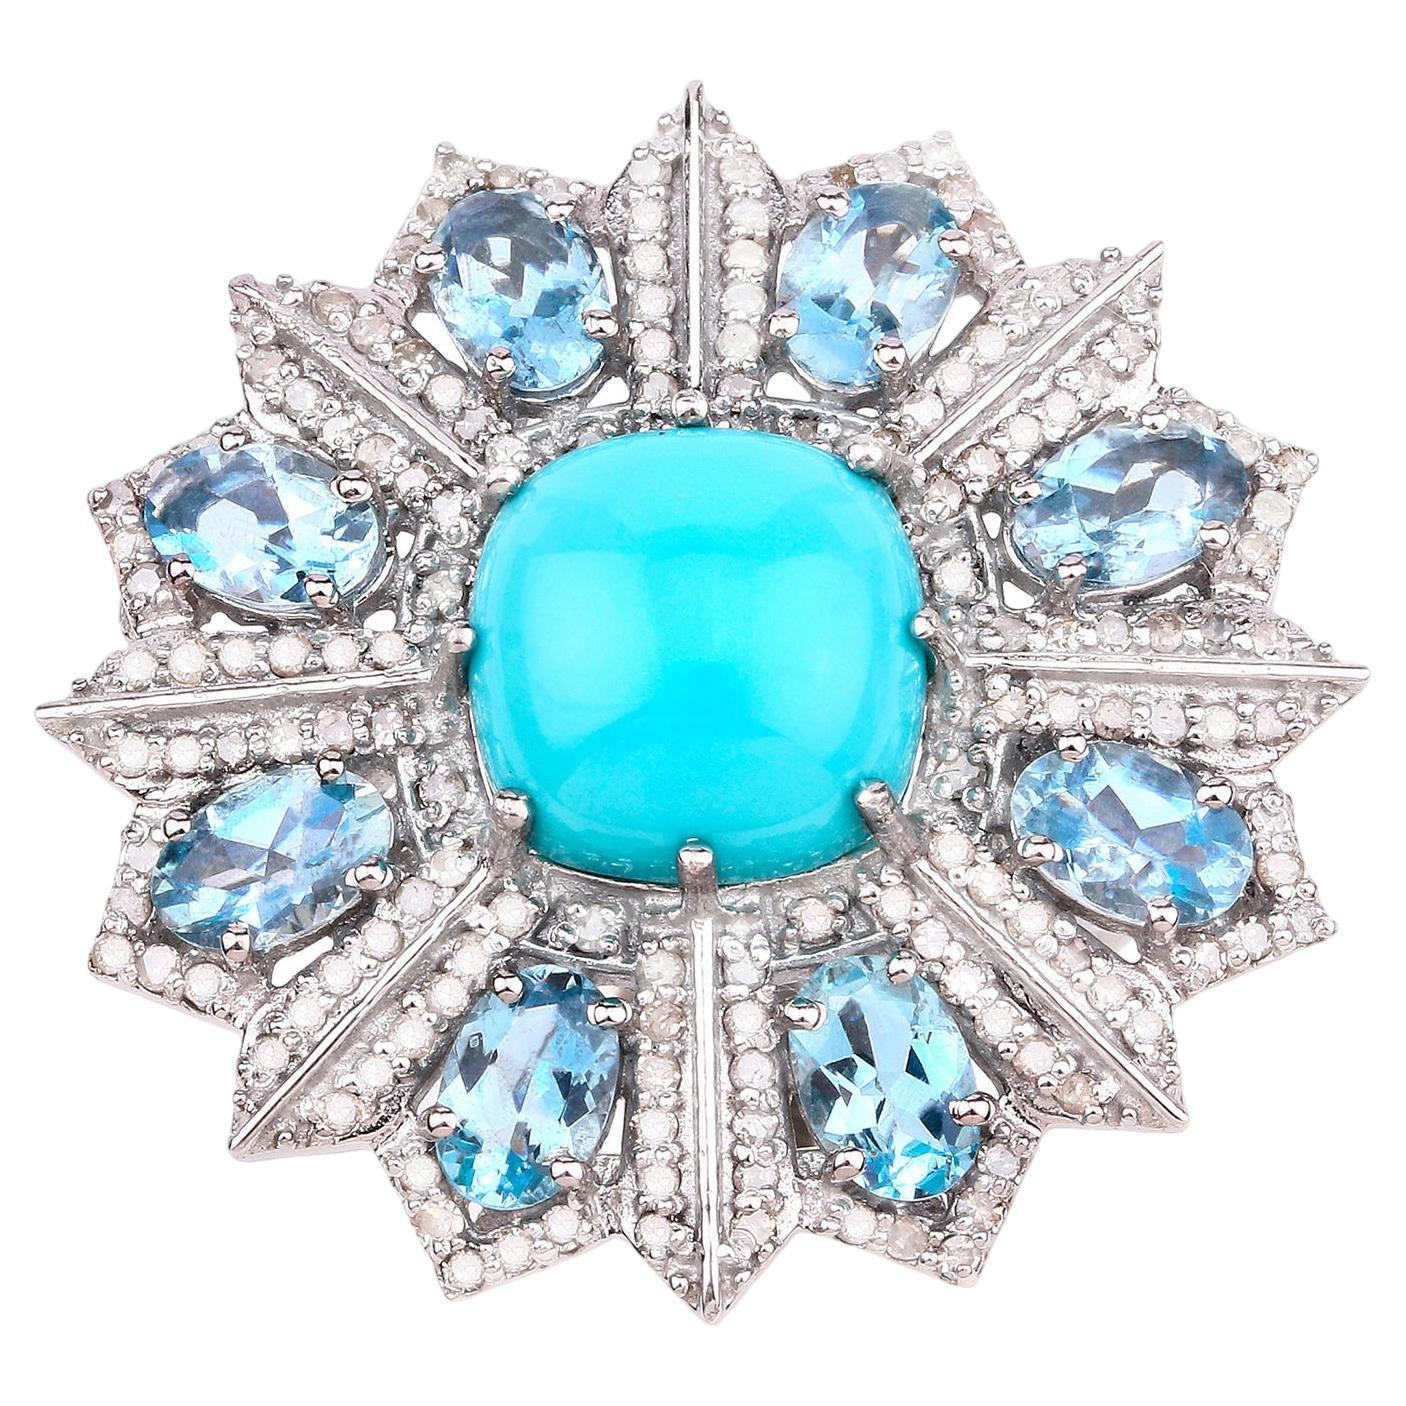 Turquoise Ring With Aquamarines and Diamonds 8.97 Carats For Sale